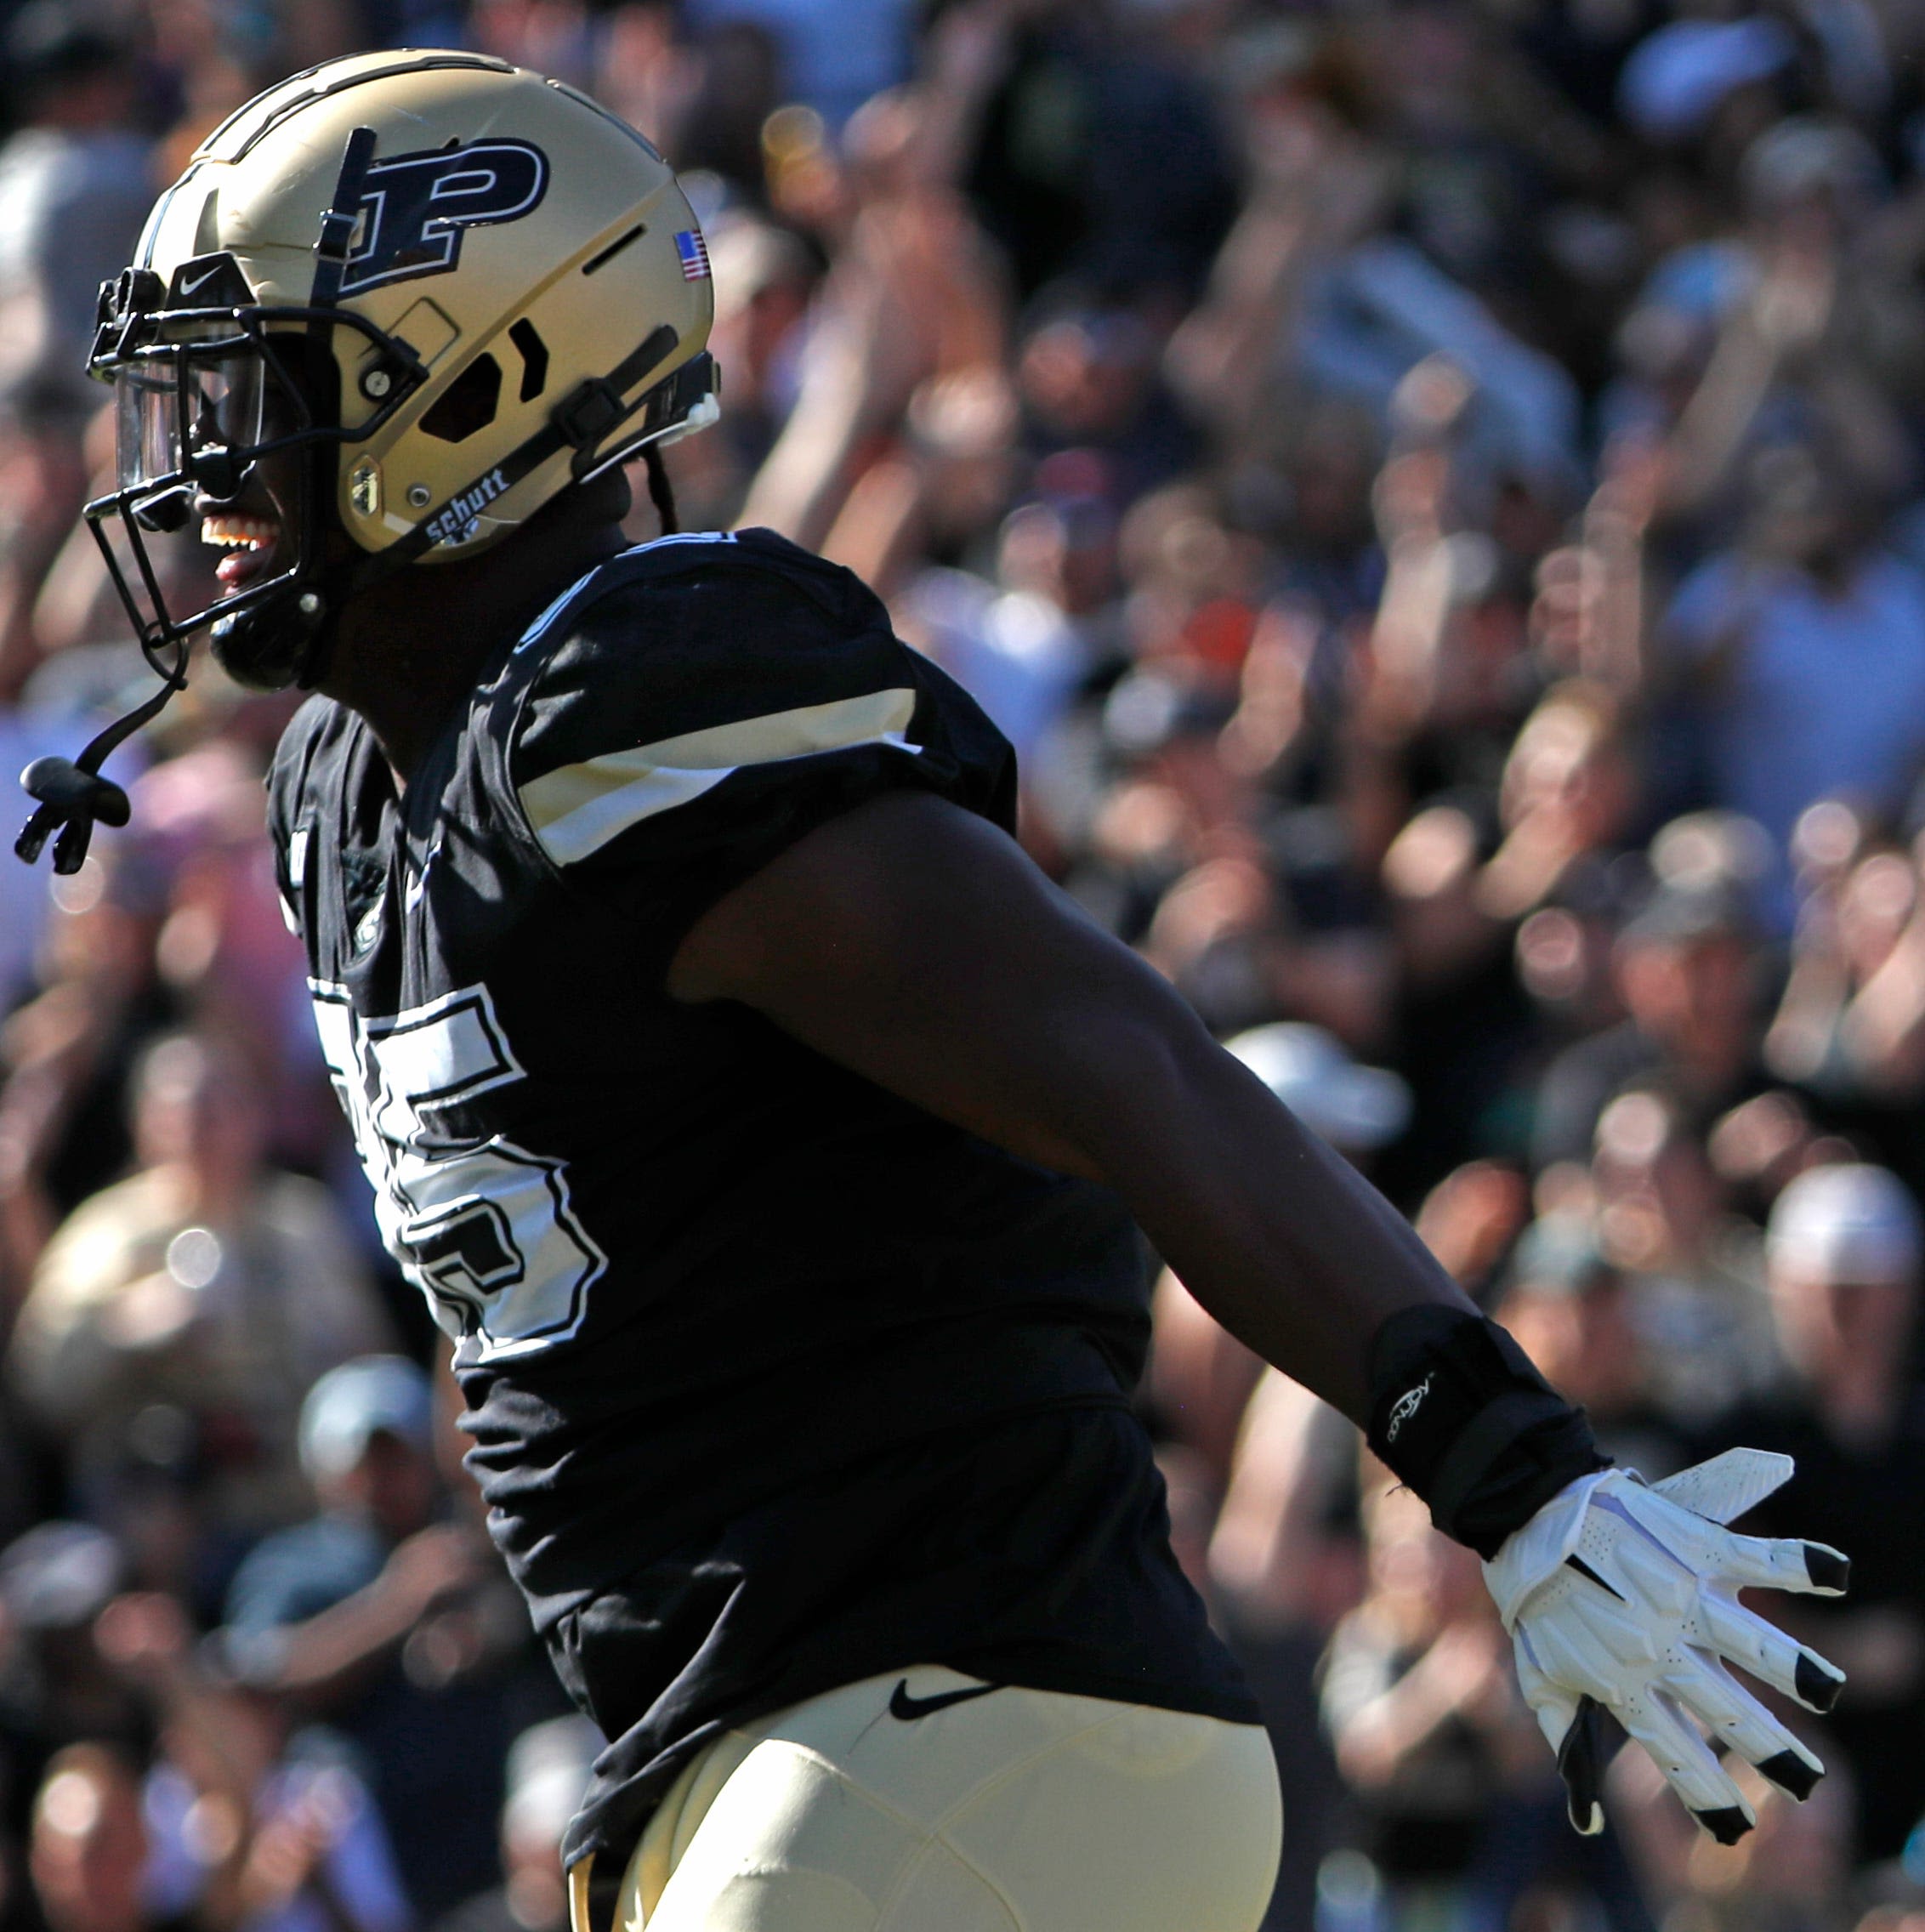 7 former Purdue football players signed UDFA deals with NFL teams. Where are the headed?